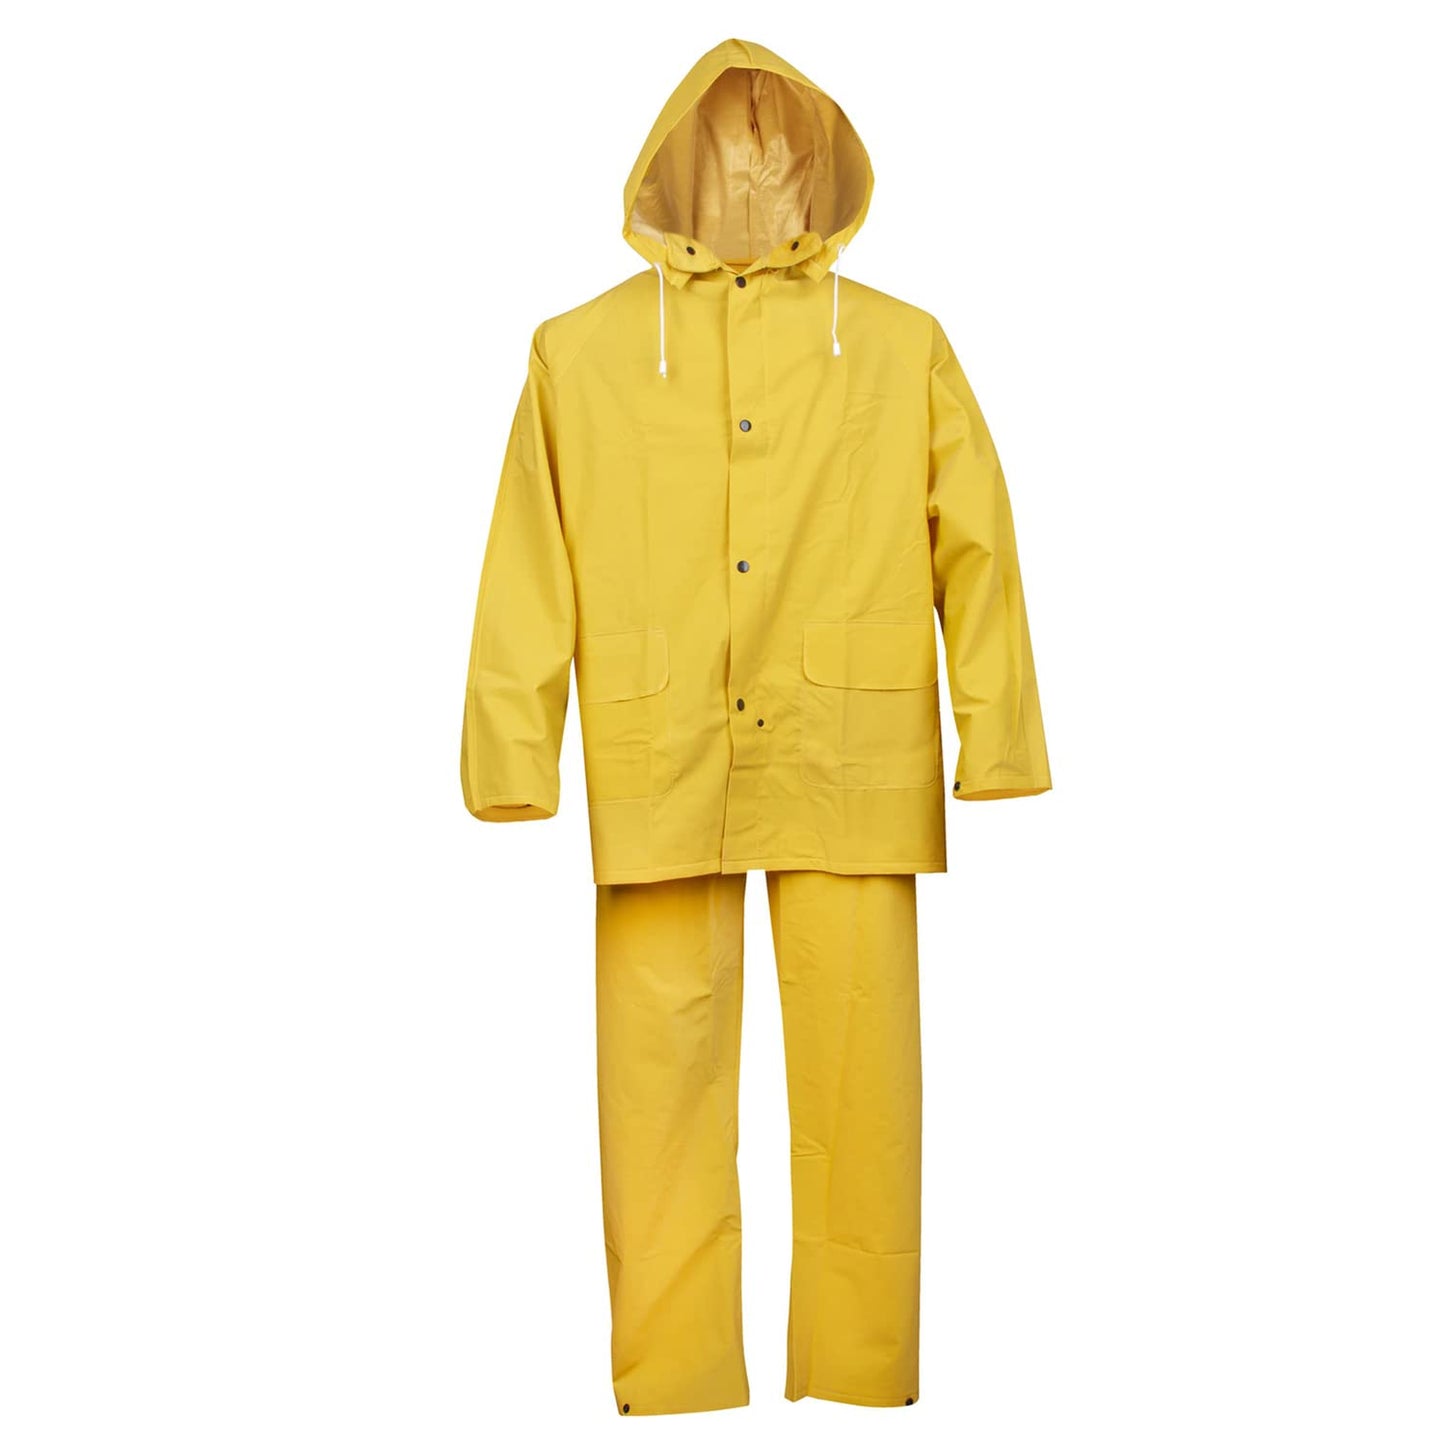 Yellow 3-Piece Rain Suit .35mm PVC/Polyester, Detachable Hood w/Drawstring, Corduroy Collar, Ventilated Cape Back and Underarms, Zipper and Buttons, Raincoat/Pants/Hood